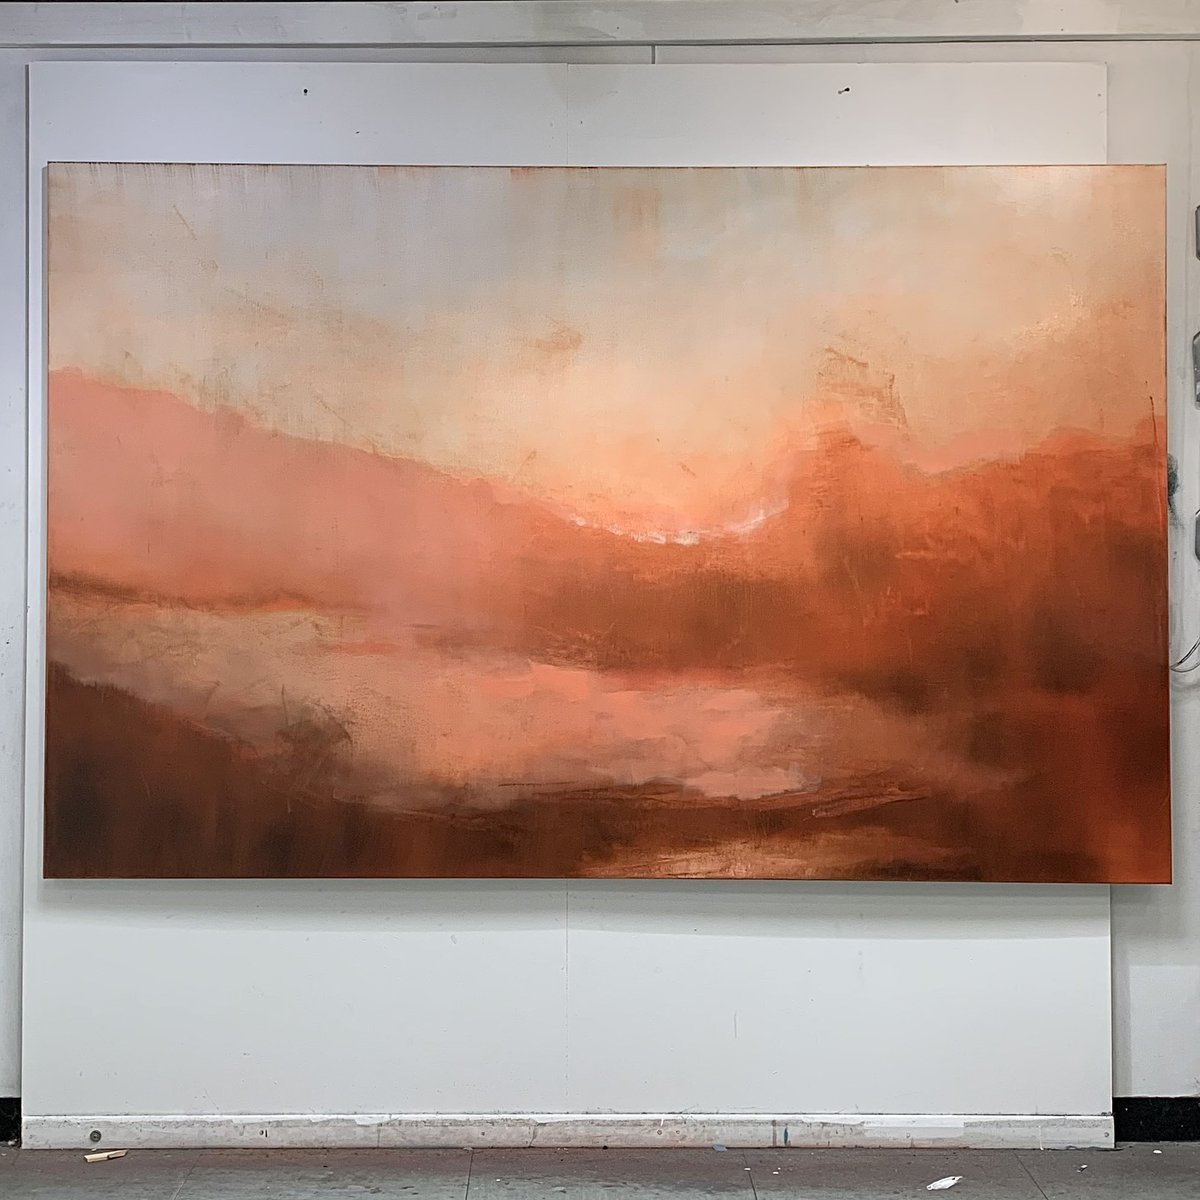 Carrying on with this 250x160cm oil on linen

#oilonlinen #landscapepainting